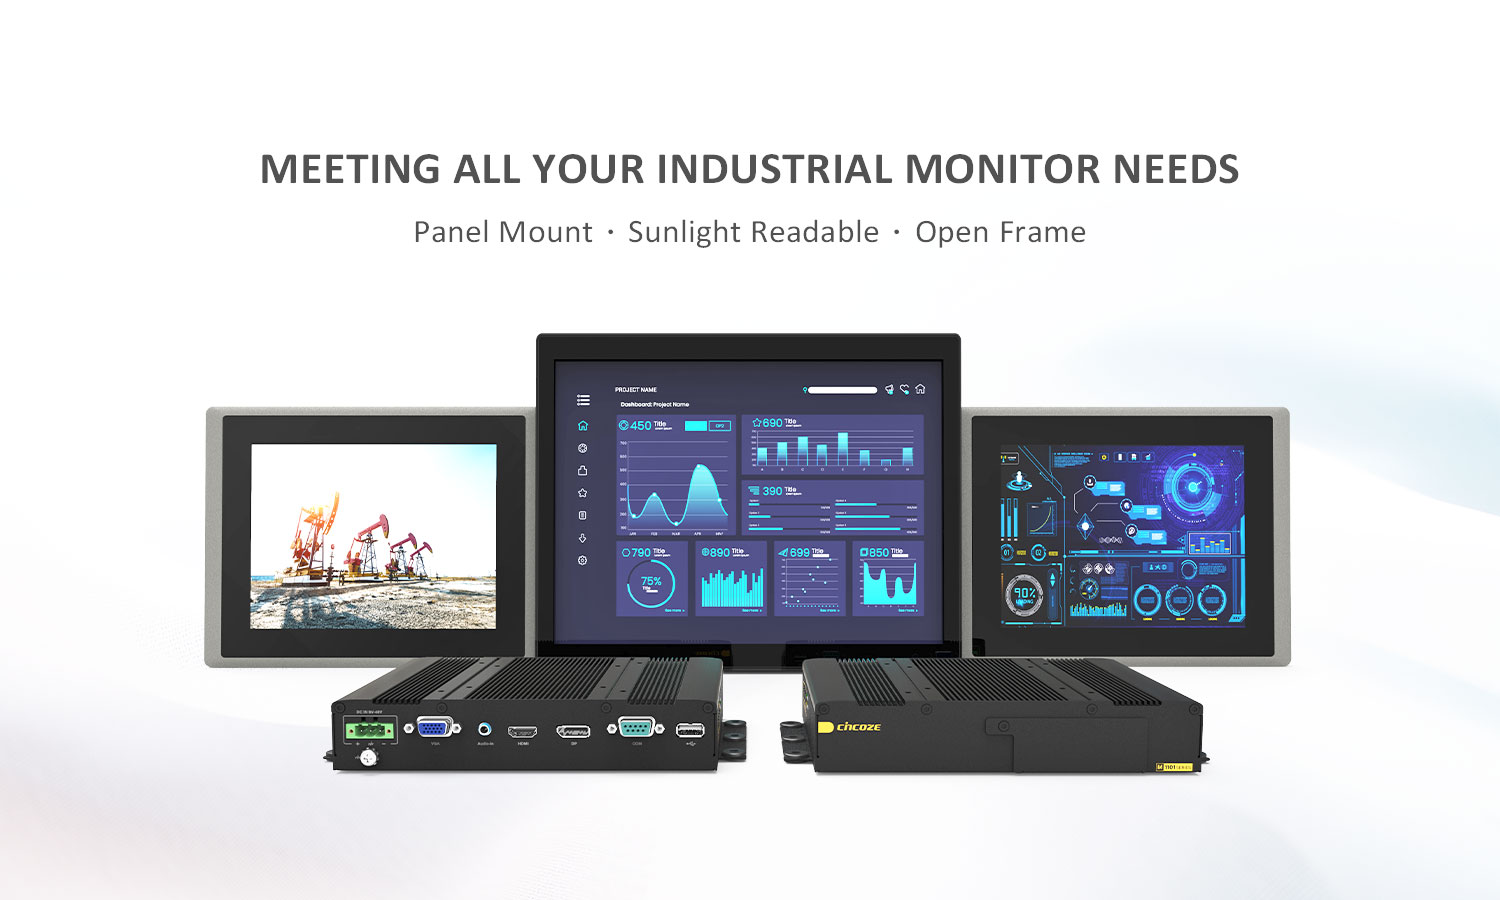 Cincoze M1101, Meeting All Your Industrial Monitor Needs, Panel Mount, Sunlight Readable, Open Frame